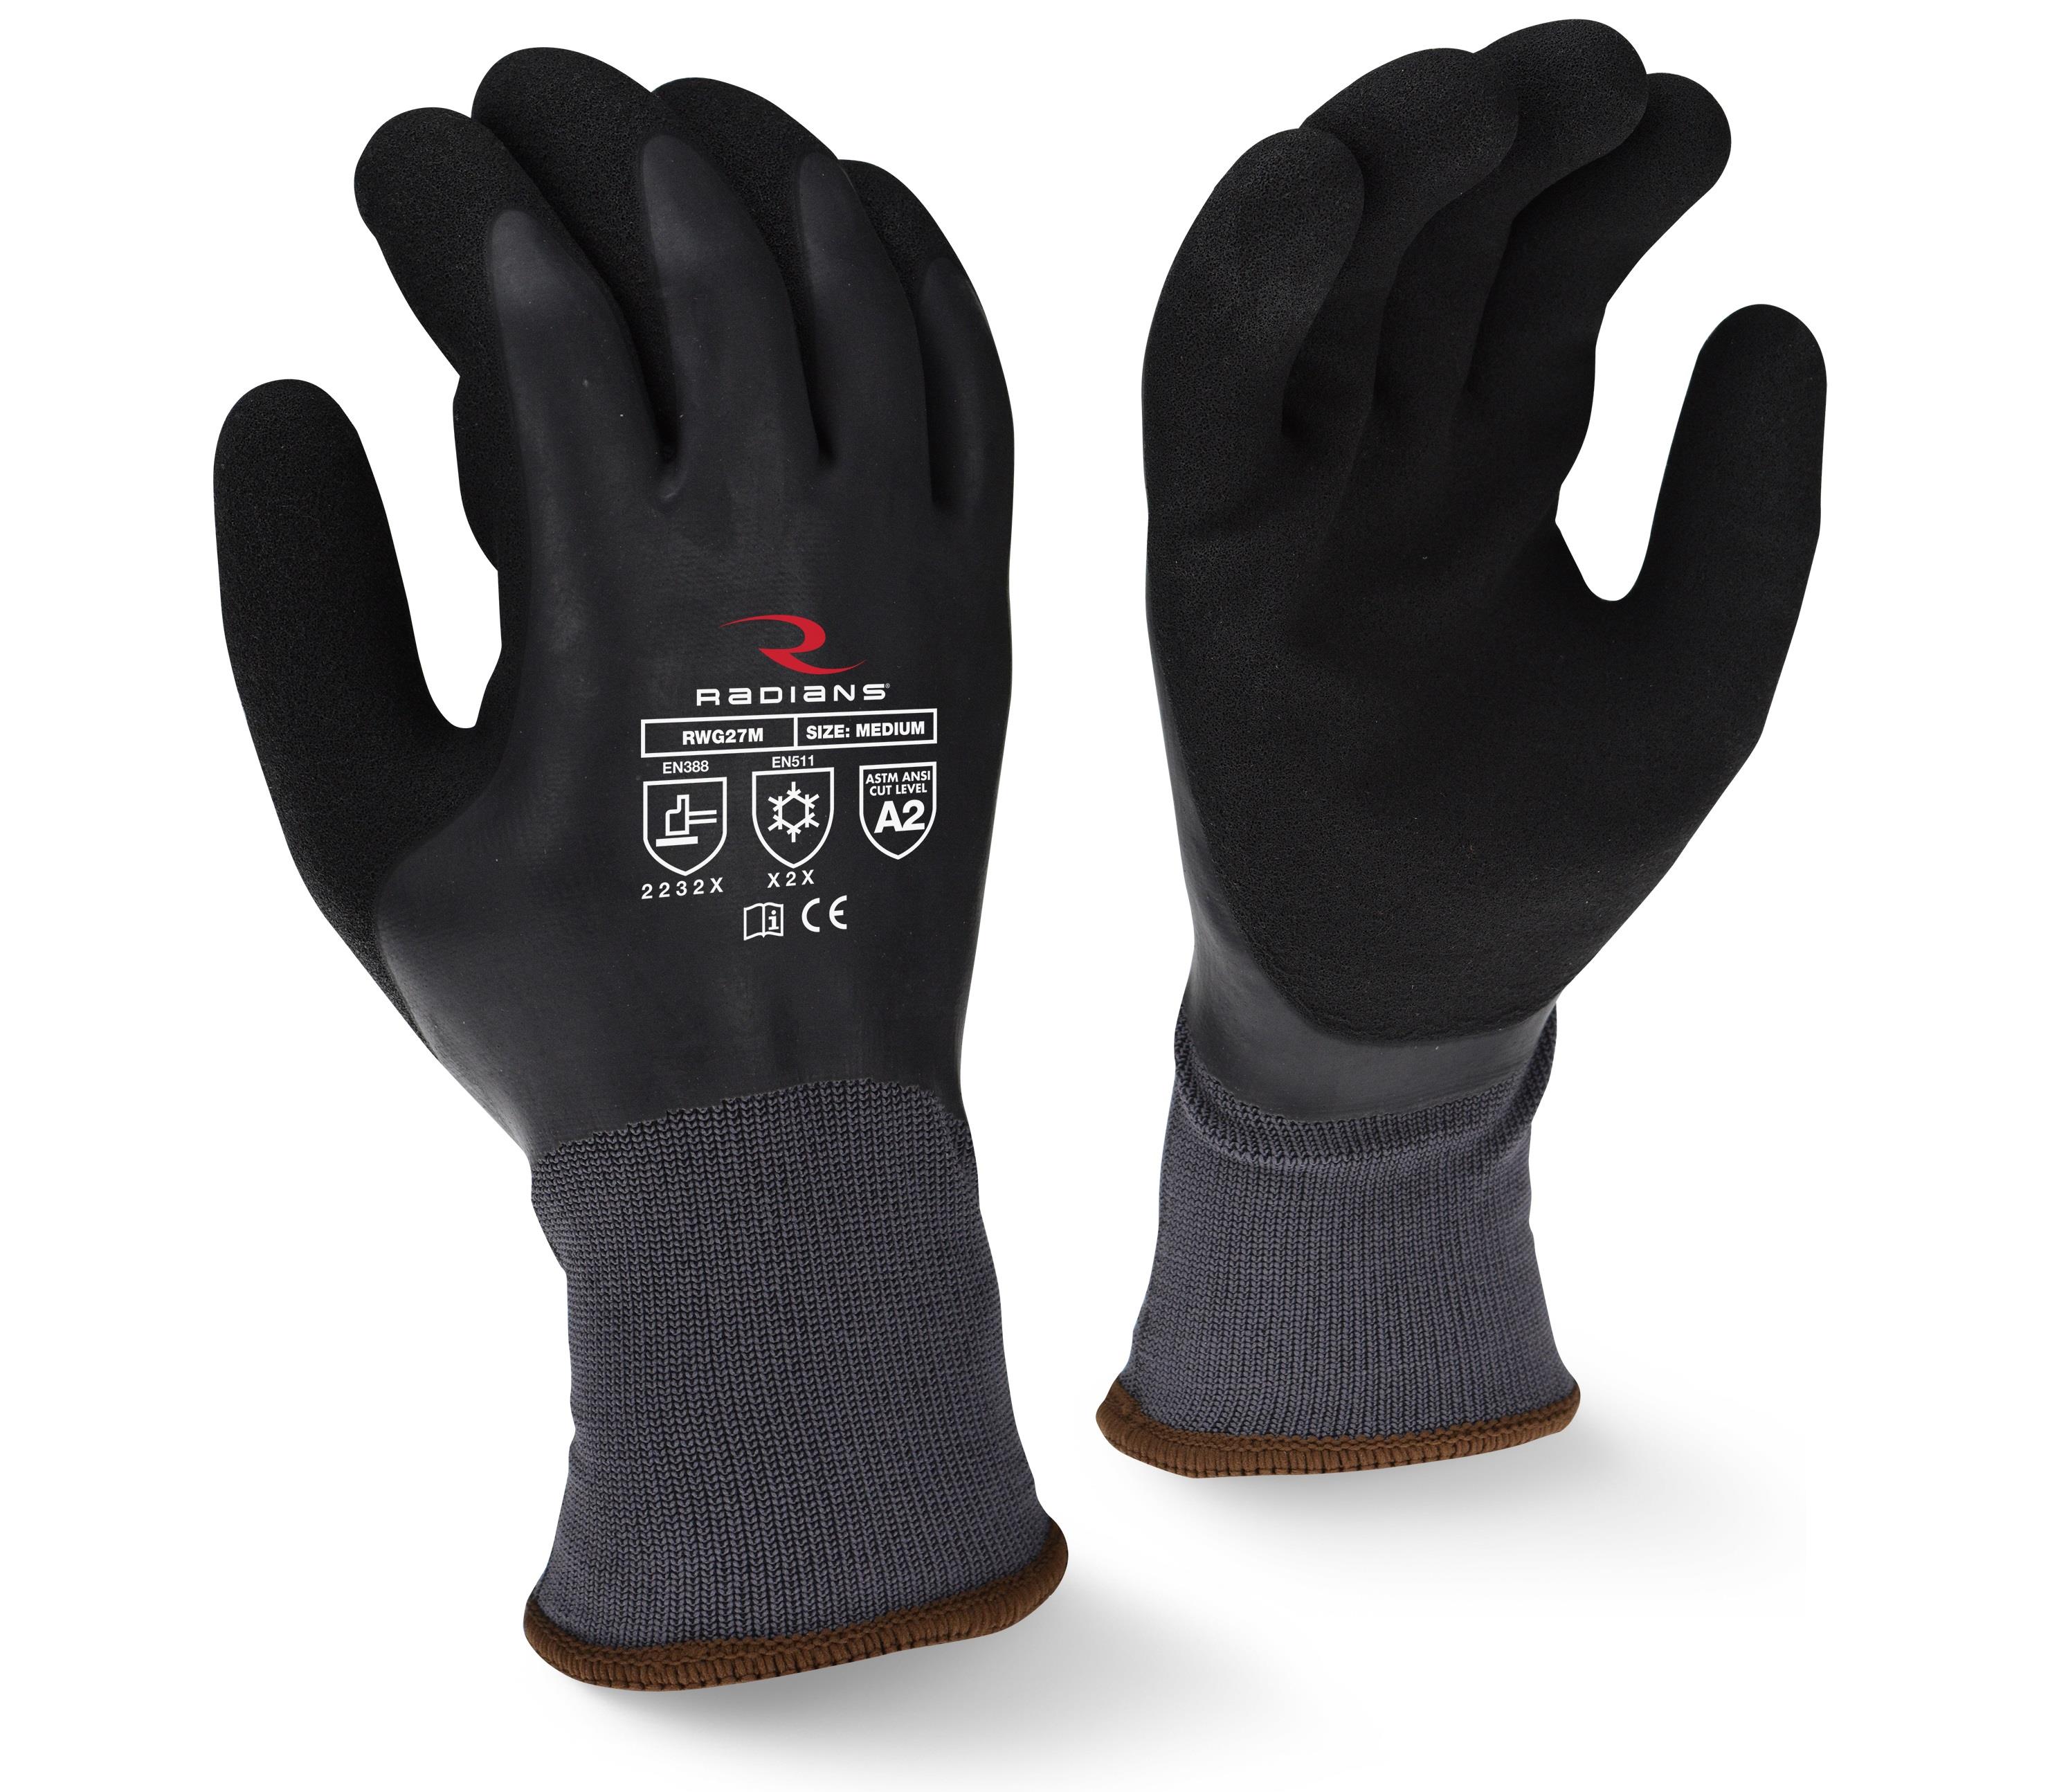 RADIANS RWG28 FULL LATEX WINTER GLOVE - Insulated Coated Gloves